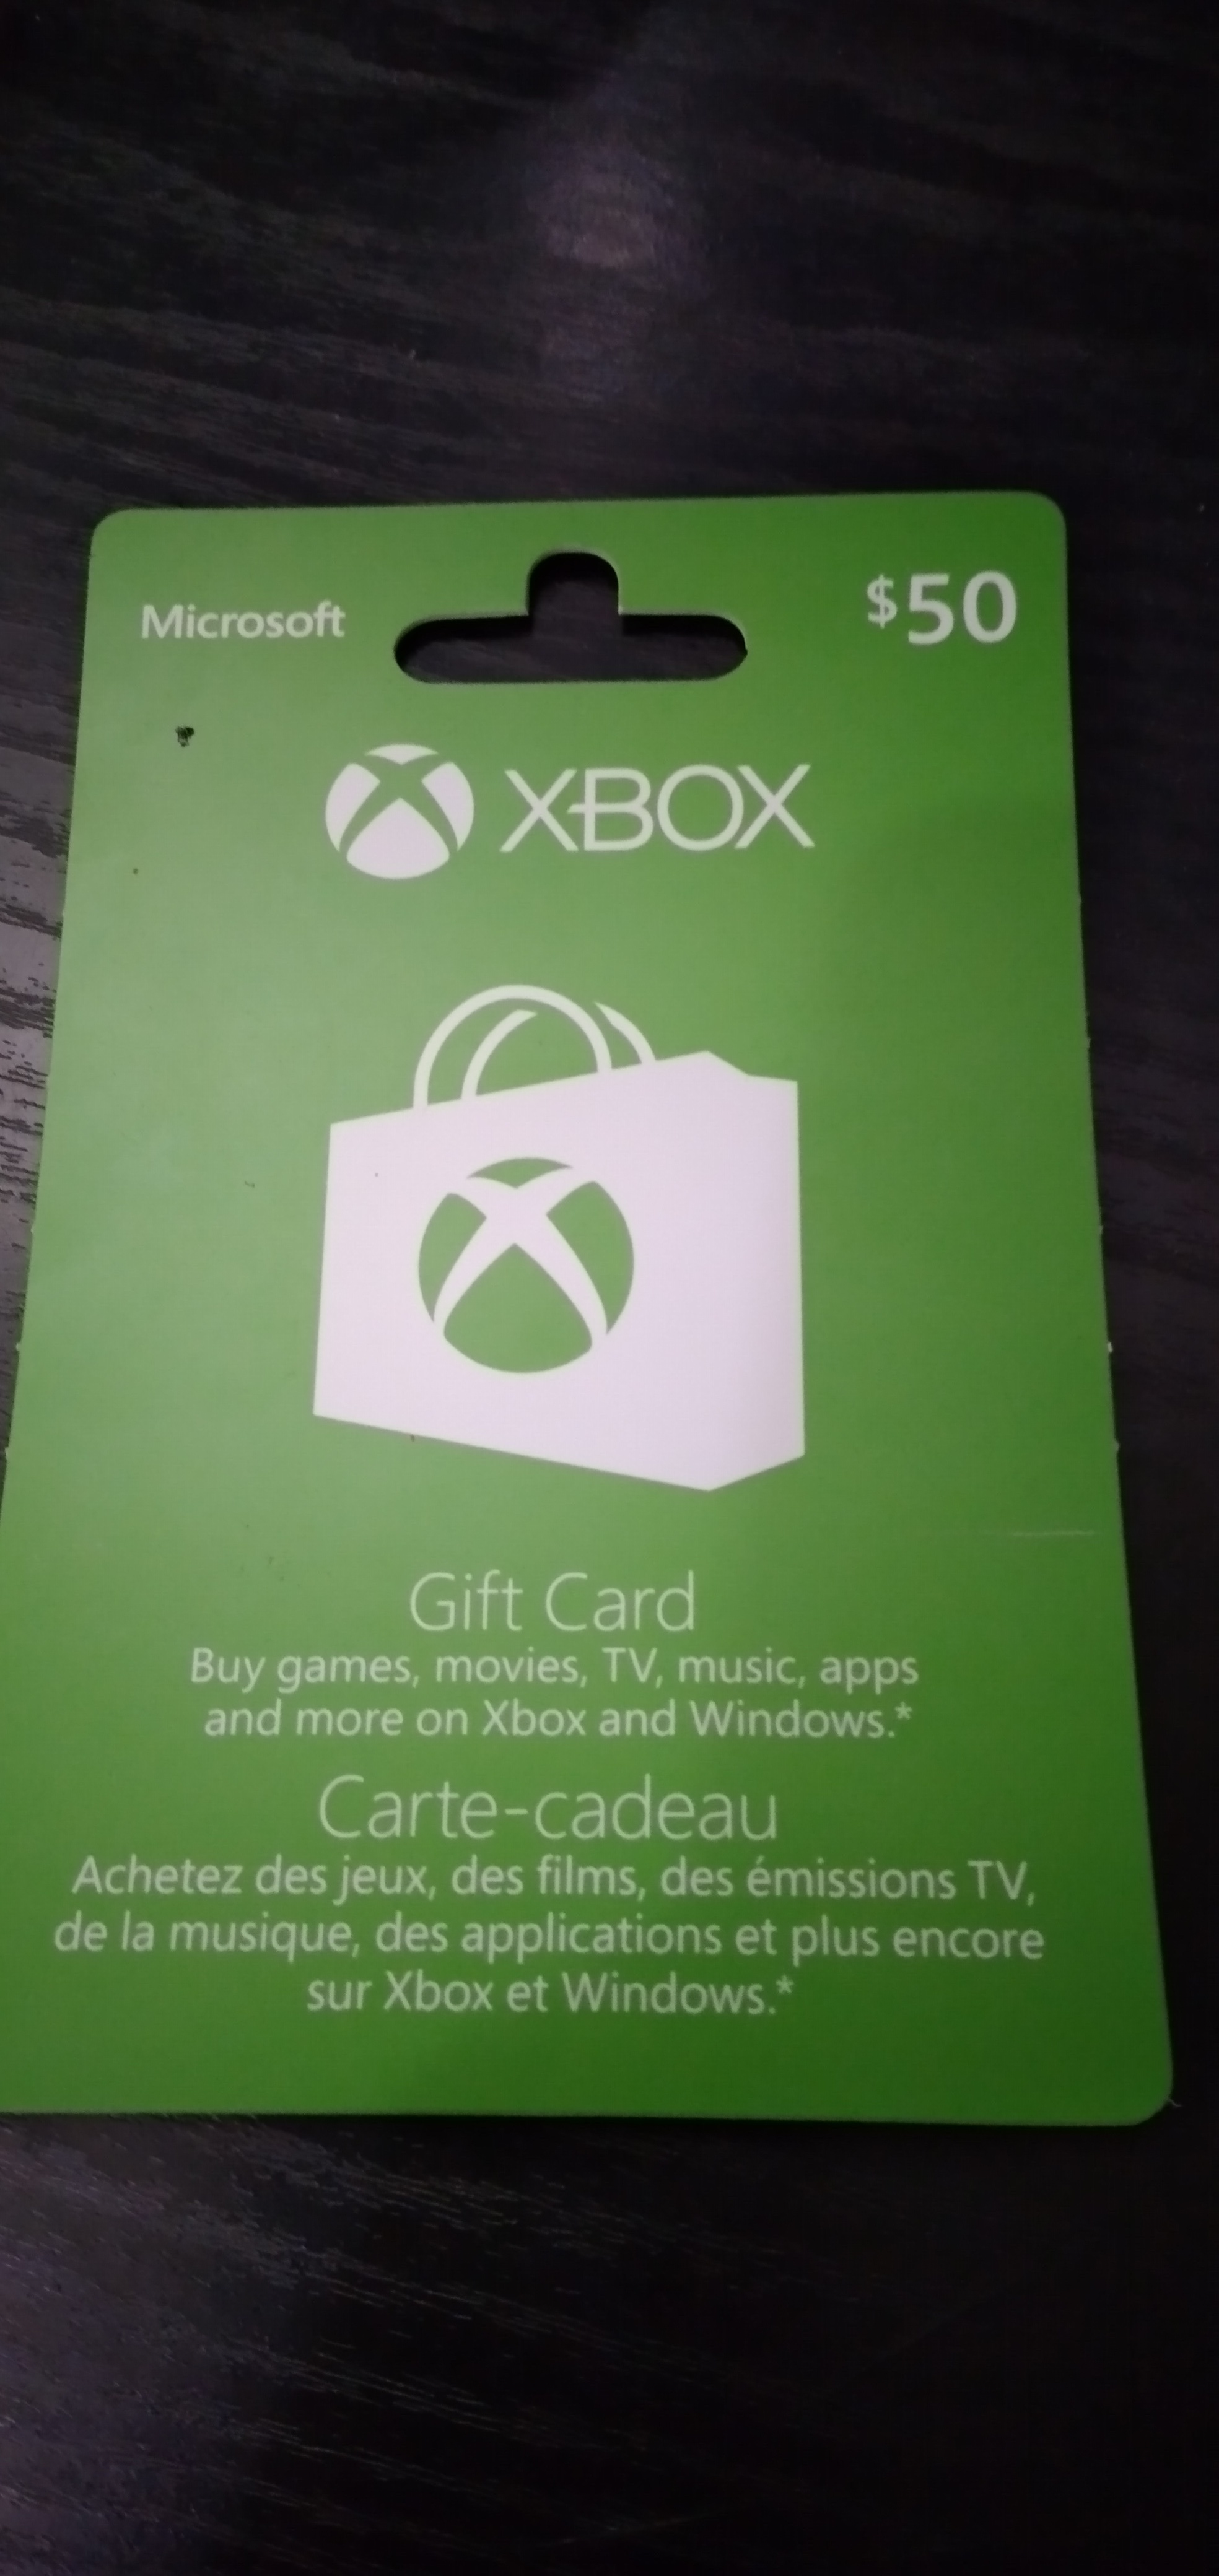 I recently purchased a $50 Xbox gift card only to find it has only